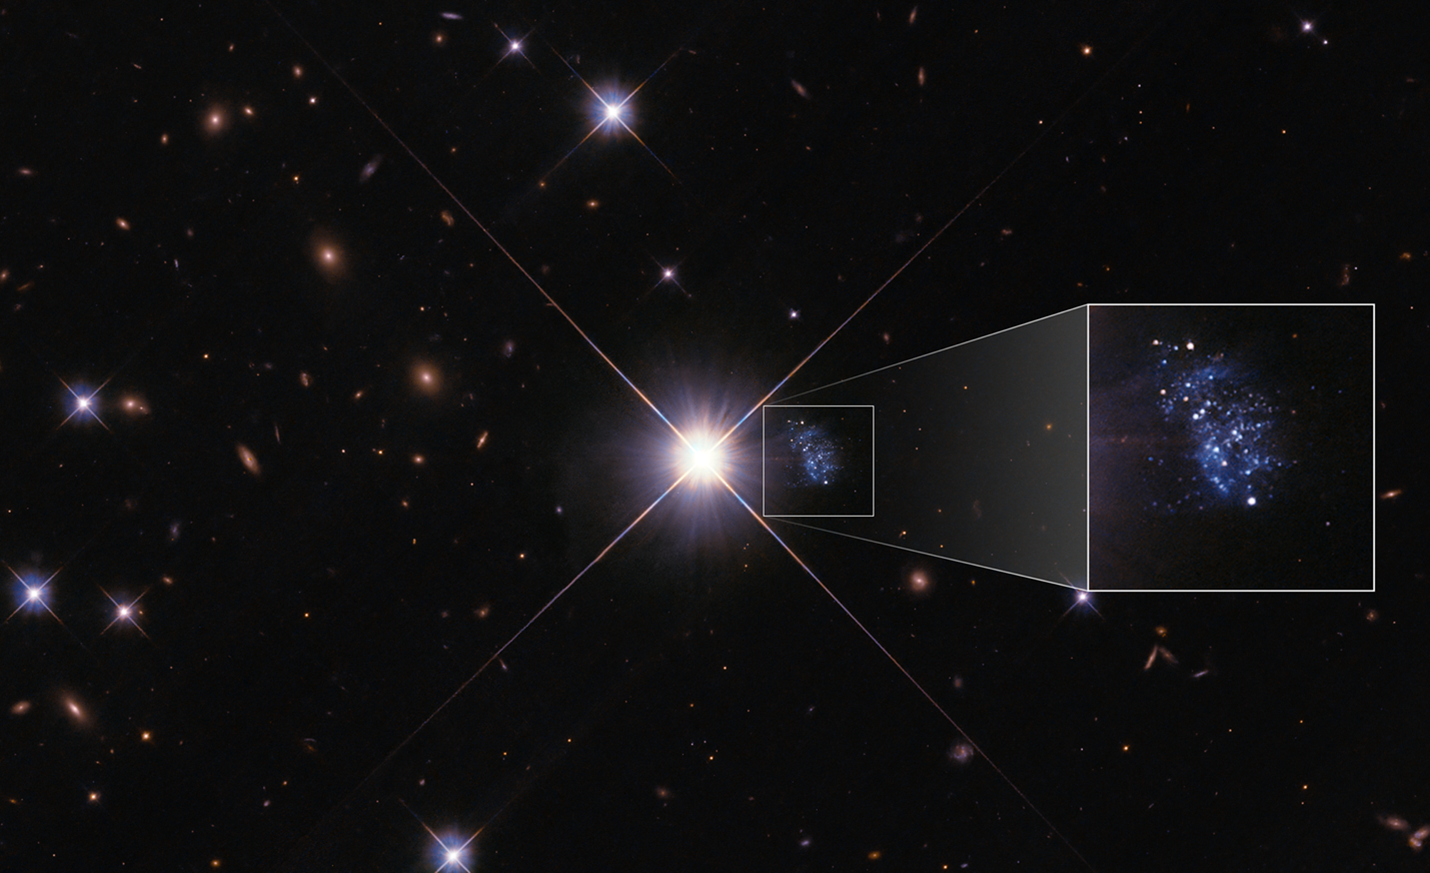 NASA's Hubble Space Telescope managed to capture a comprehensive picture of the tiny galaxy HIPASS J1131-31